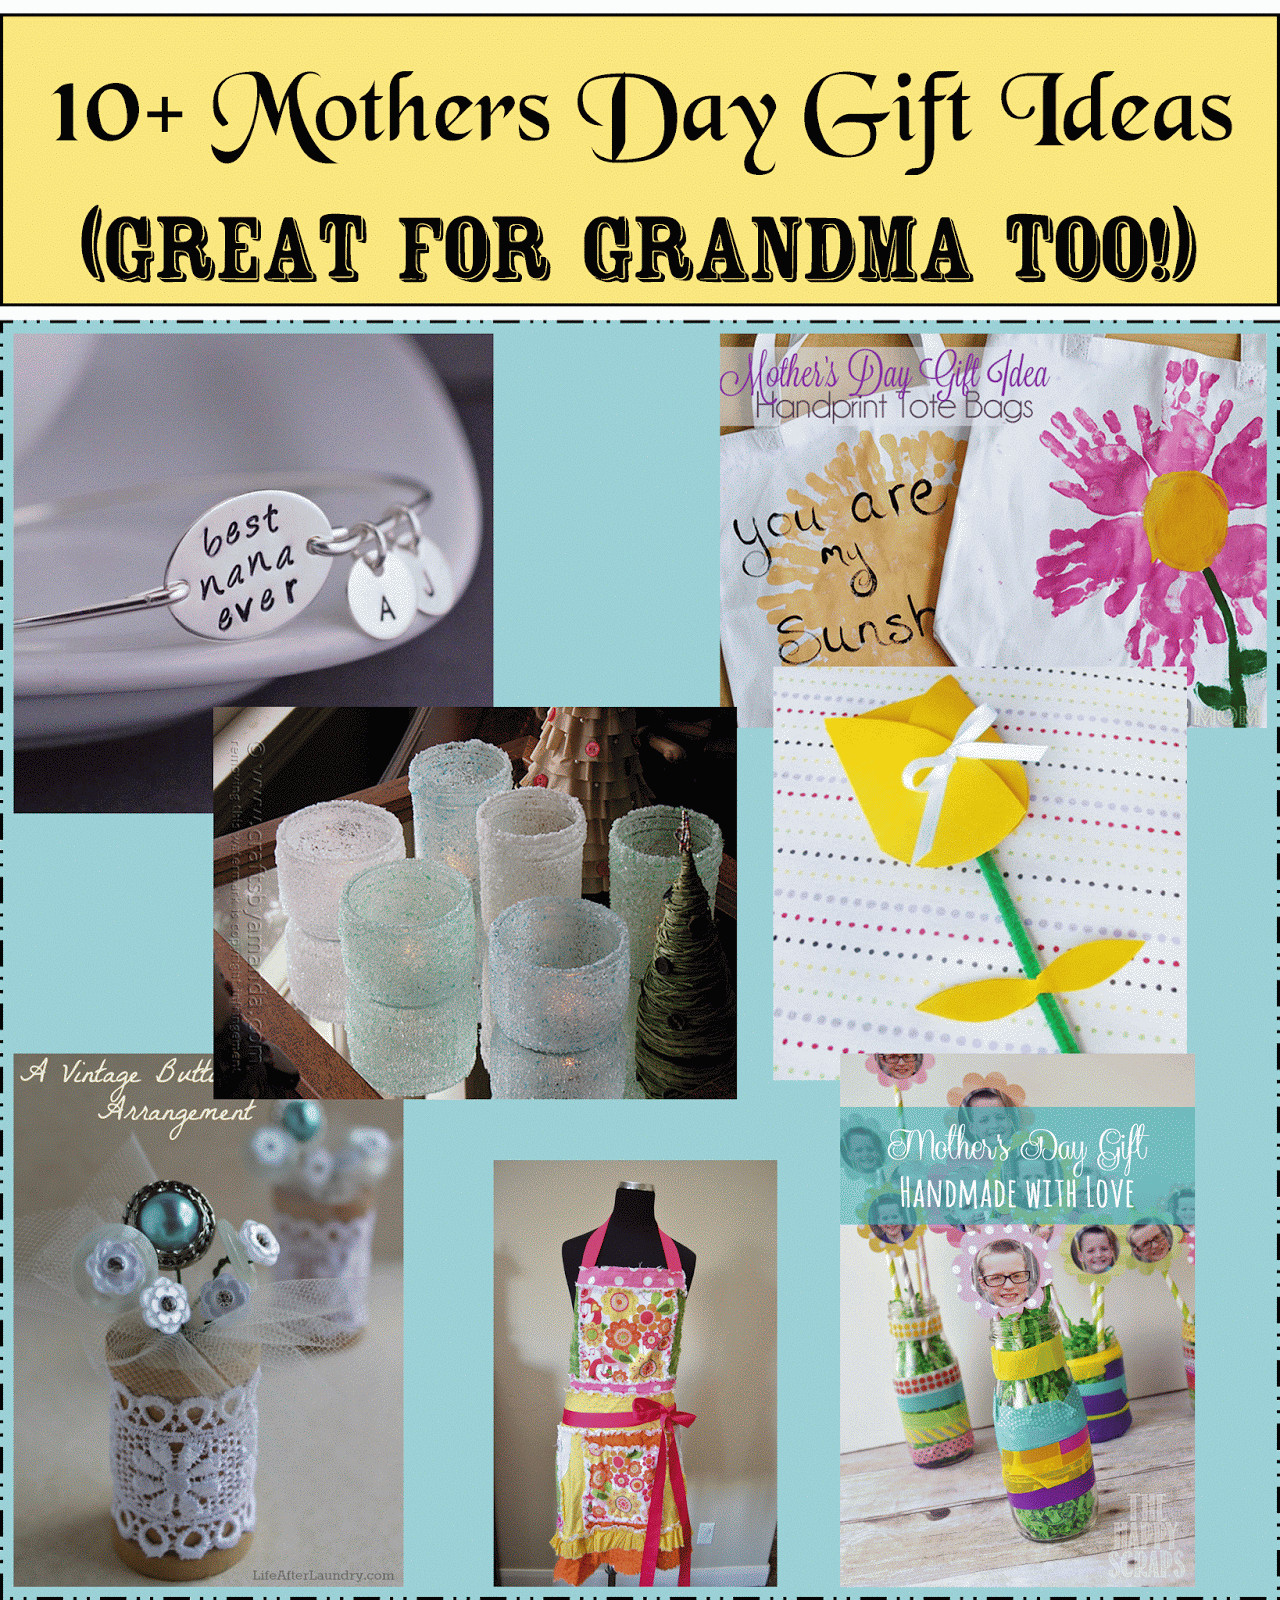 Unique Mother'S Day Gift Ideas
 Mother Day Gifts Roundup Perfect for Grandma Too